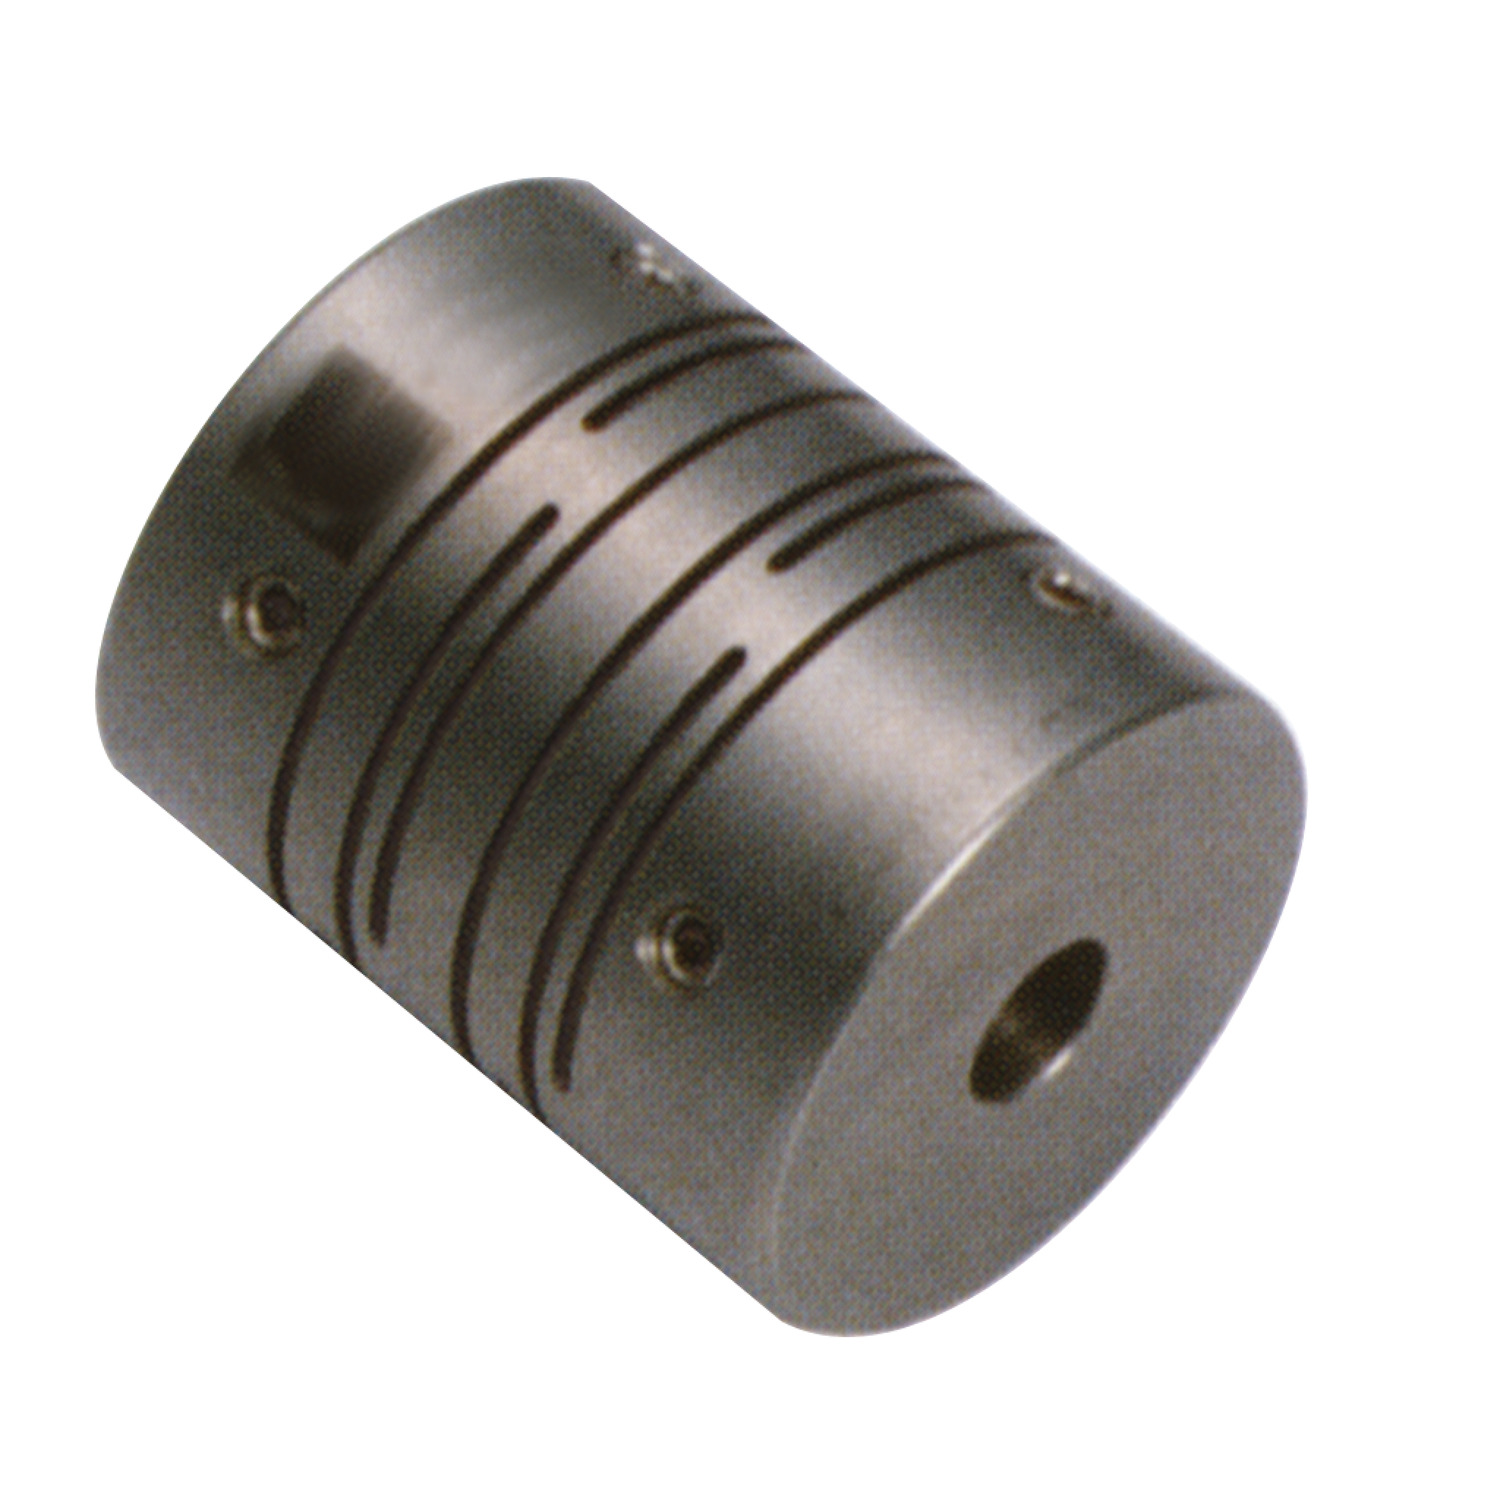 R3002.1 Spiral Beam Coupling - Stainless Steel